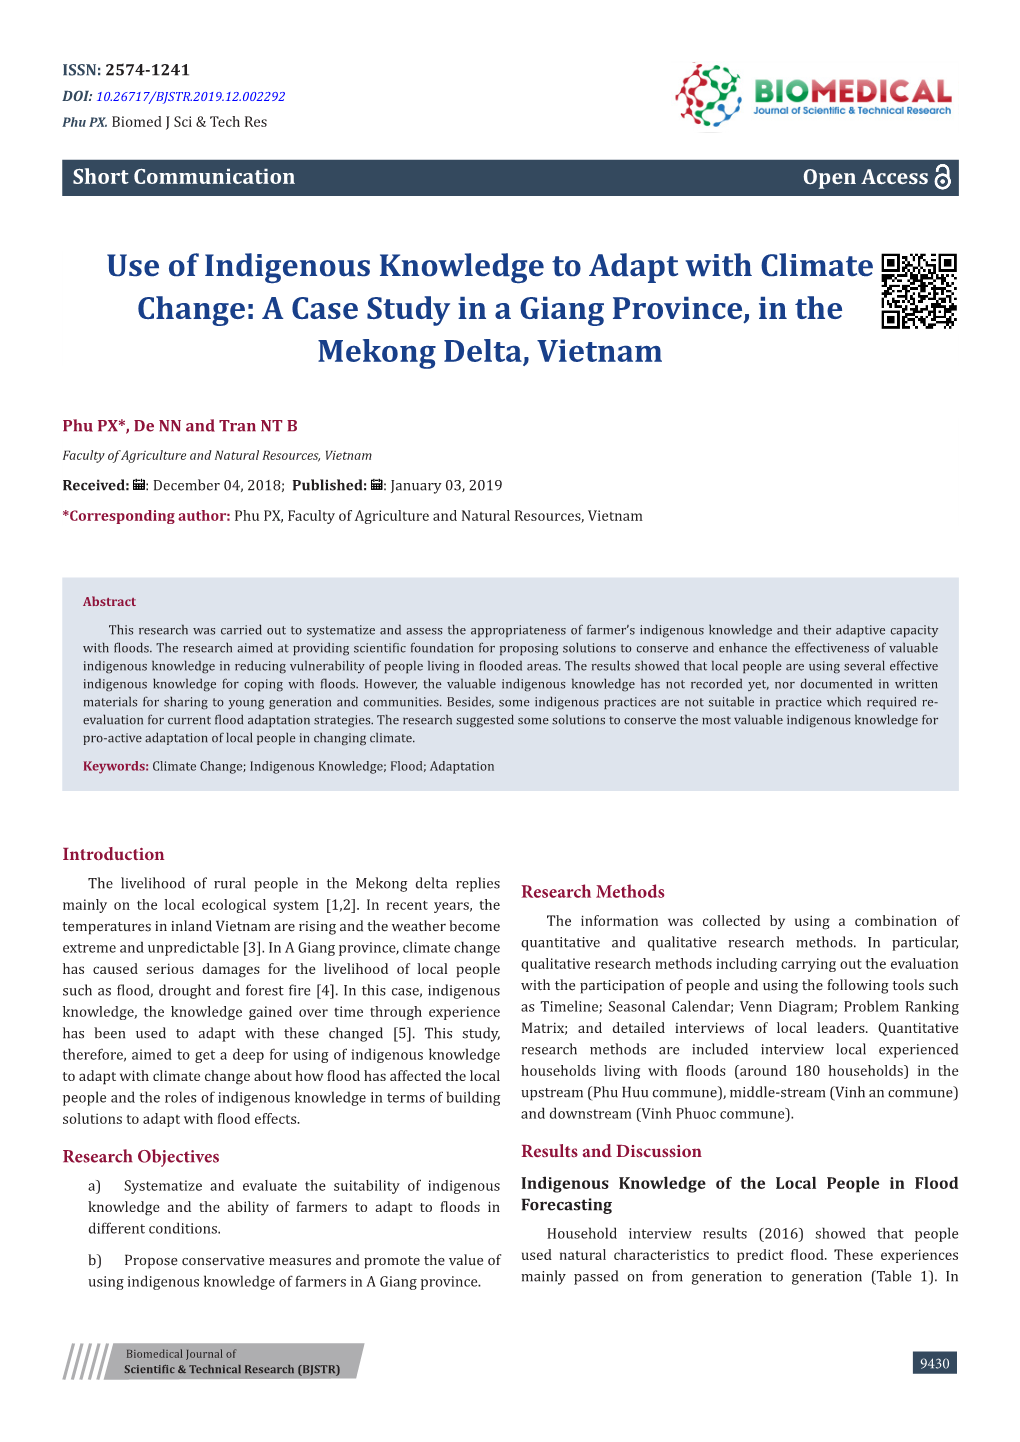 Use of Indigenous Knowledge to Adapt with Climate Change: a Case Study in a Giang Province, in the Mekong Delta, Vietnam